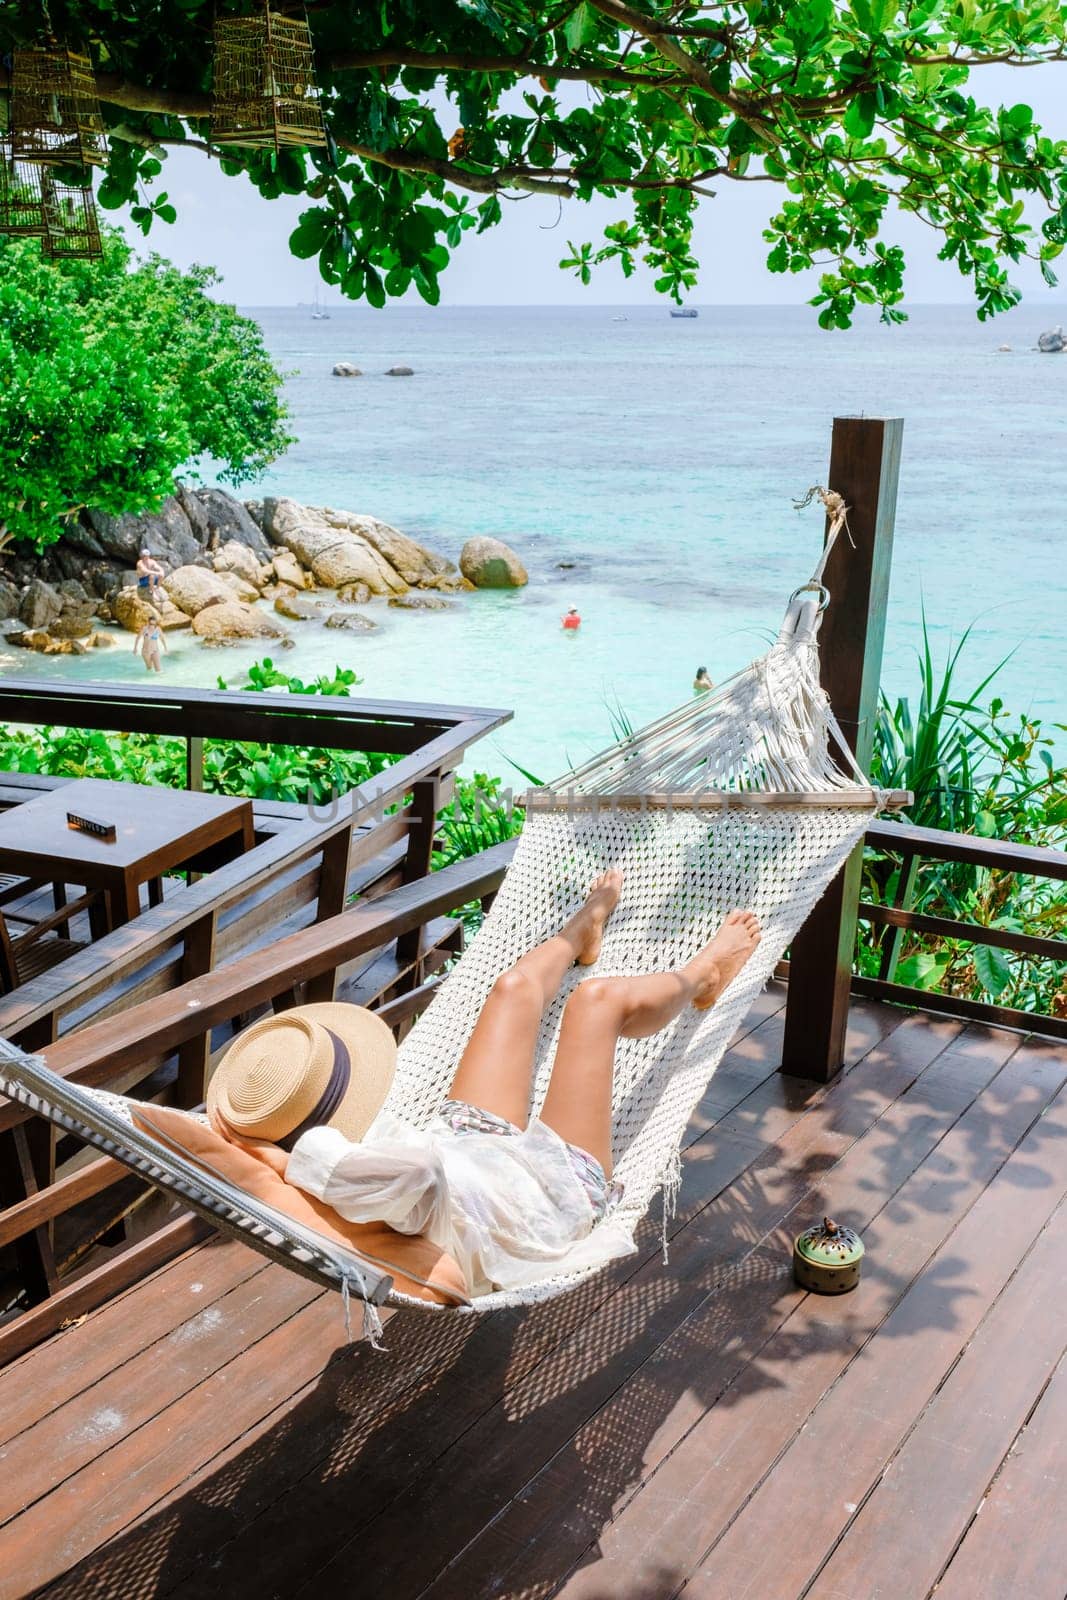 Asia women on vacation at Koh Lipe Island Thailand relaxing at a hammock, a tropical Island with a blue ocean and white soft sand. Ko Lipe Island Thailand